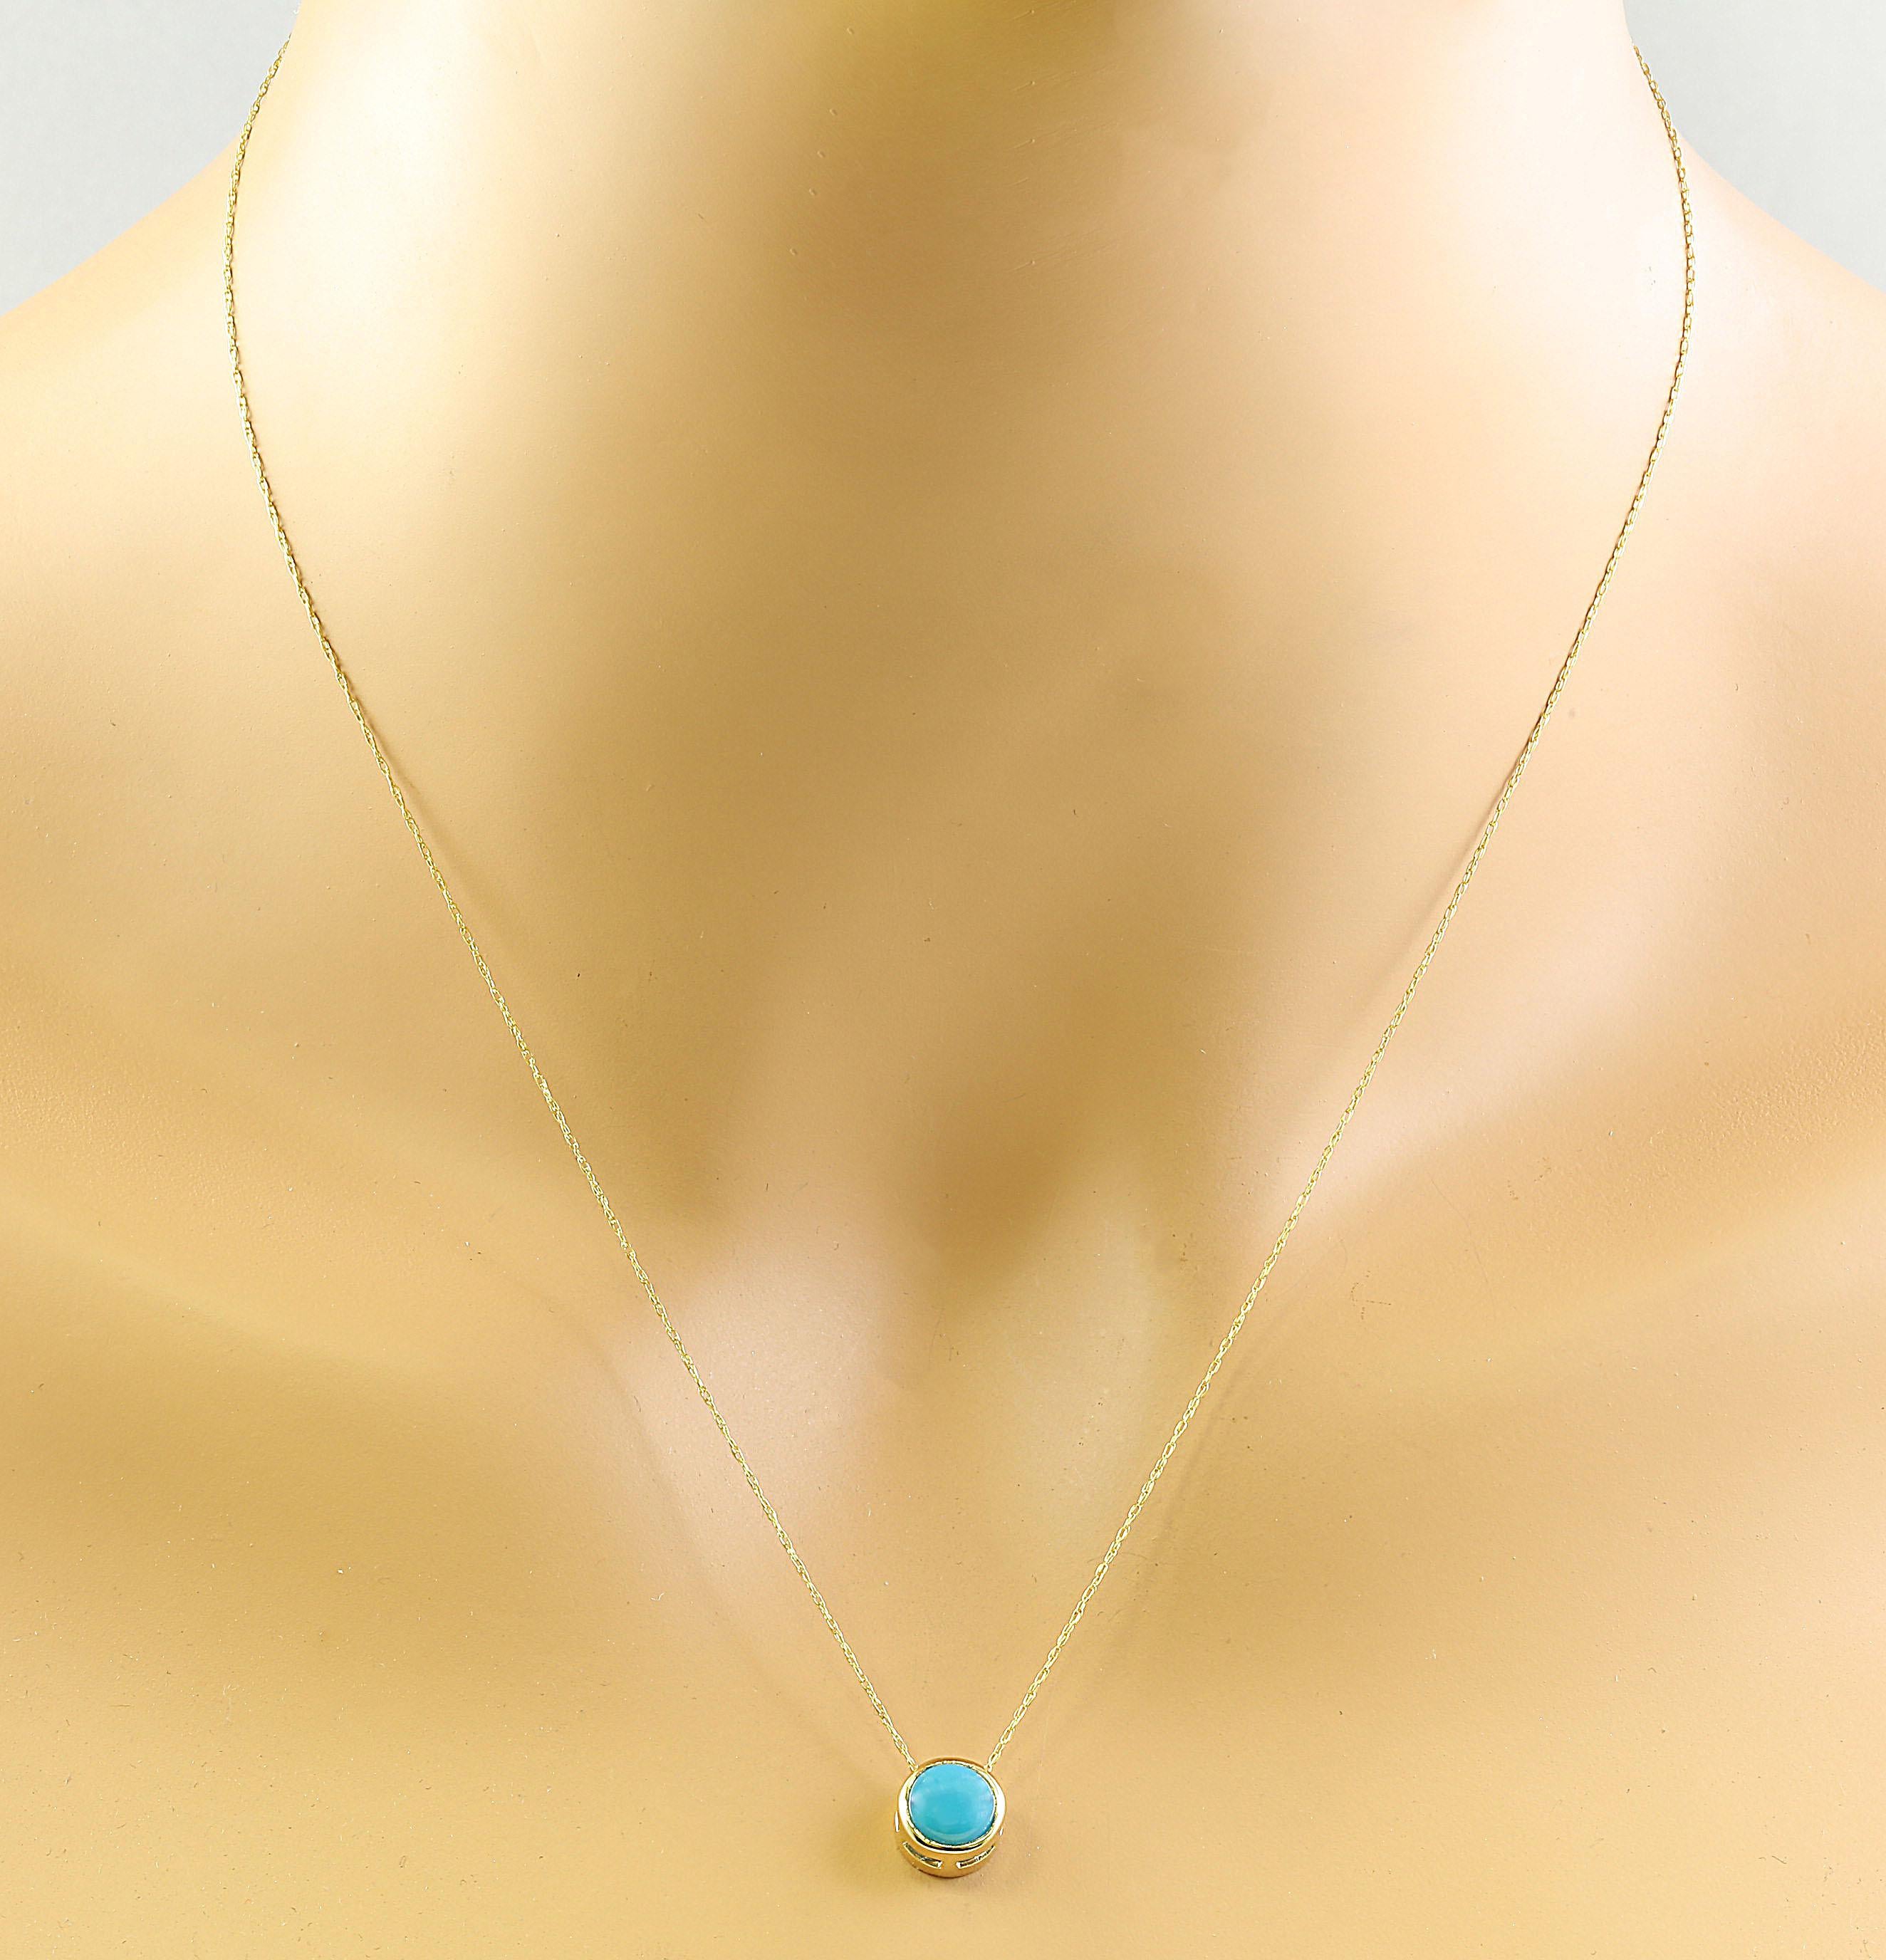 1.50 Carat Turquoise 14K Yellow Gold Necklace
Stamped: 14K
Total Necklace Weight: 1.4 Grams
Length: 16 Inches
Turquoise Weight: 1.50 Carat (6.50x6.50 Millimeters) 
Face Measures: 8.20x8.20 Millimeter 
SKU: [600187]